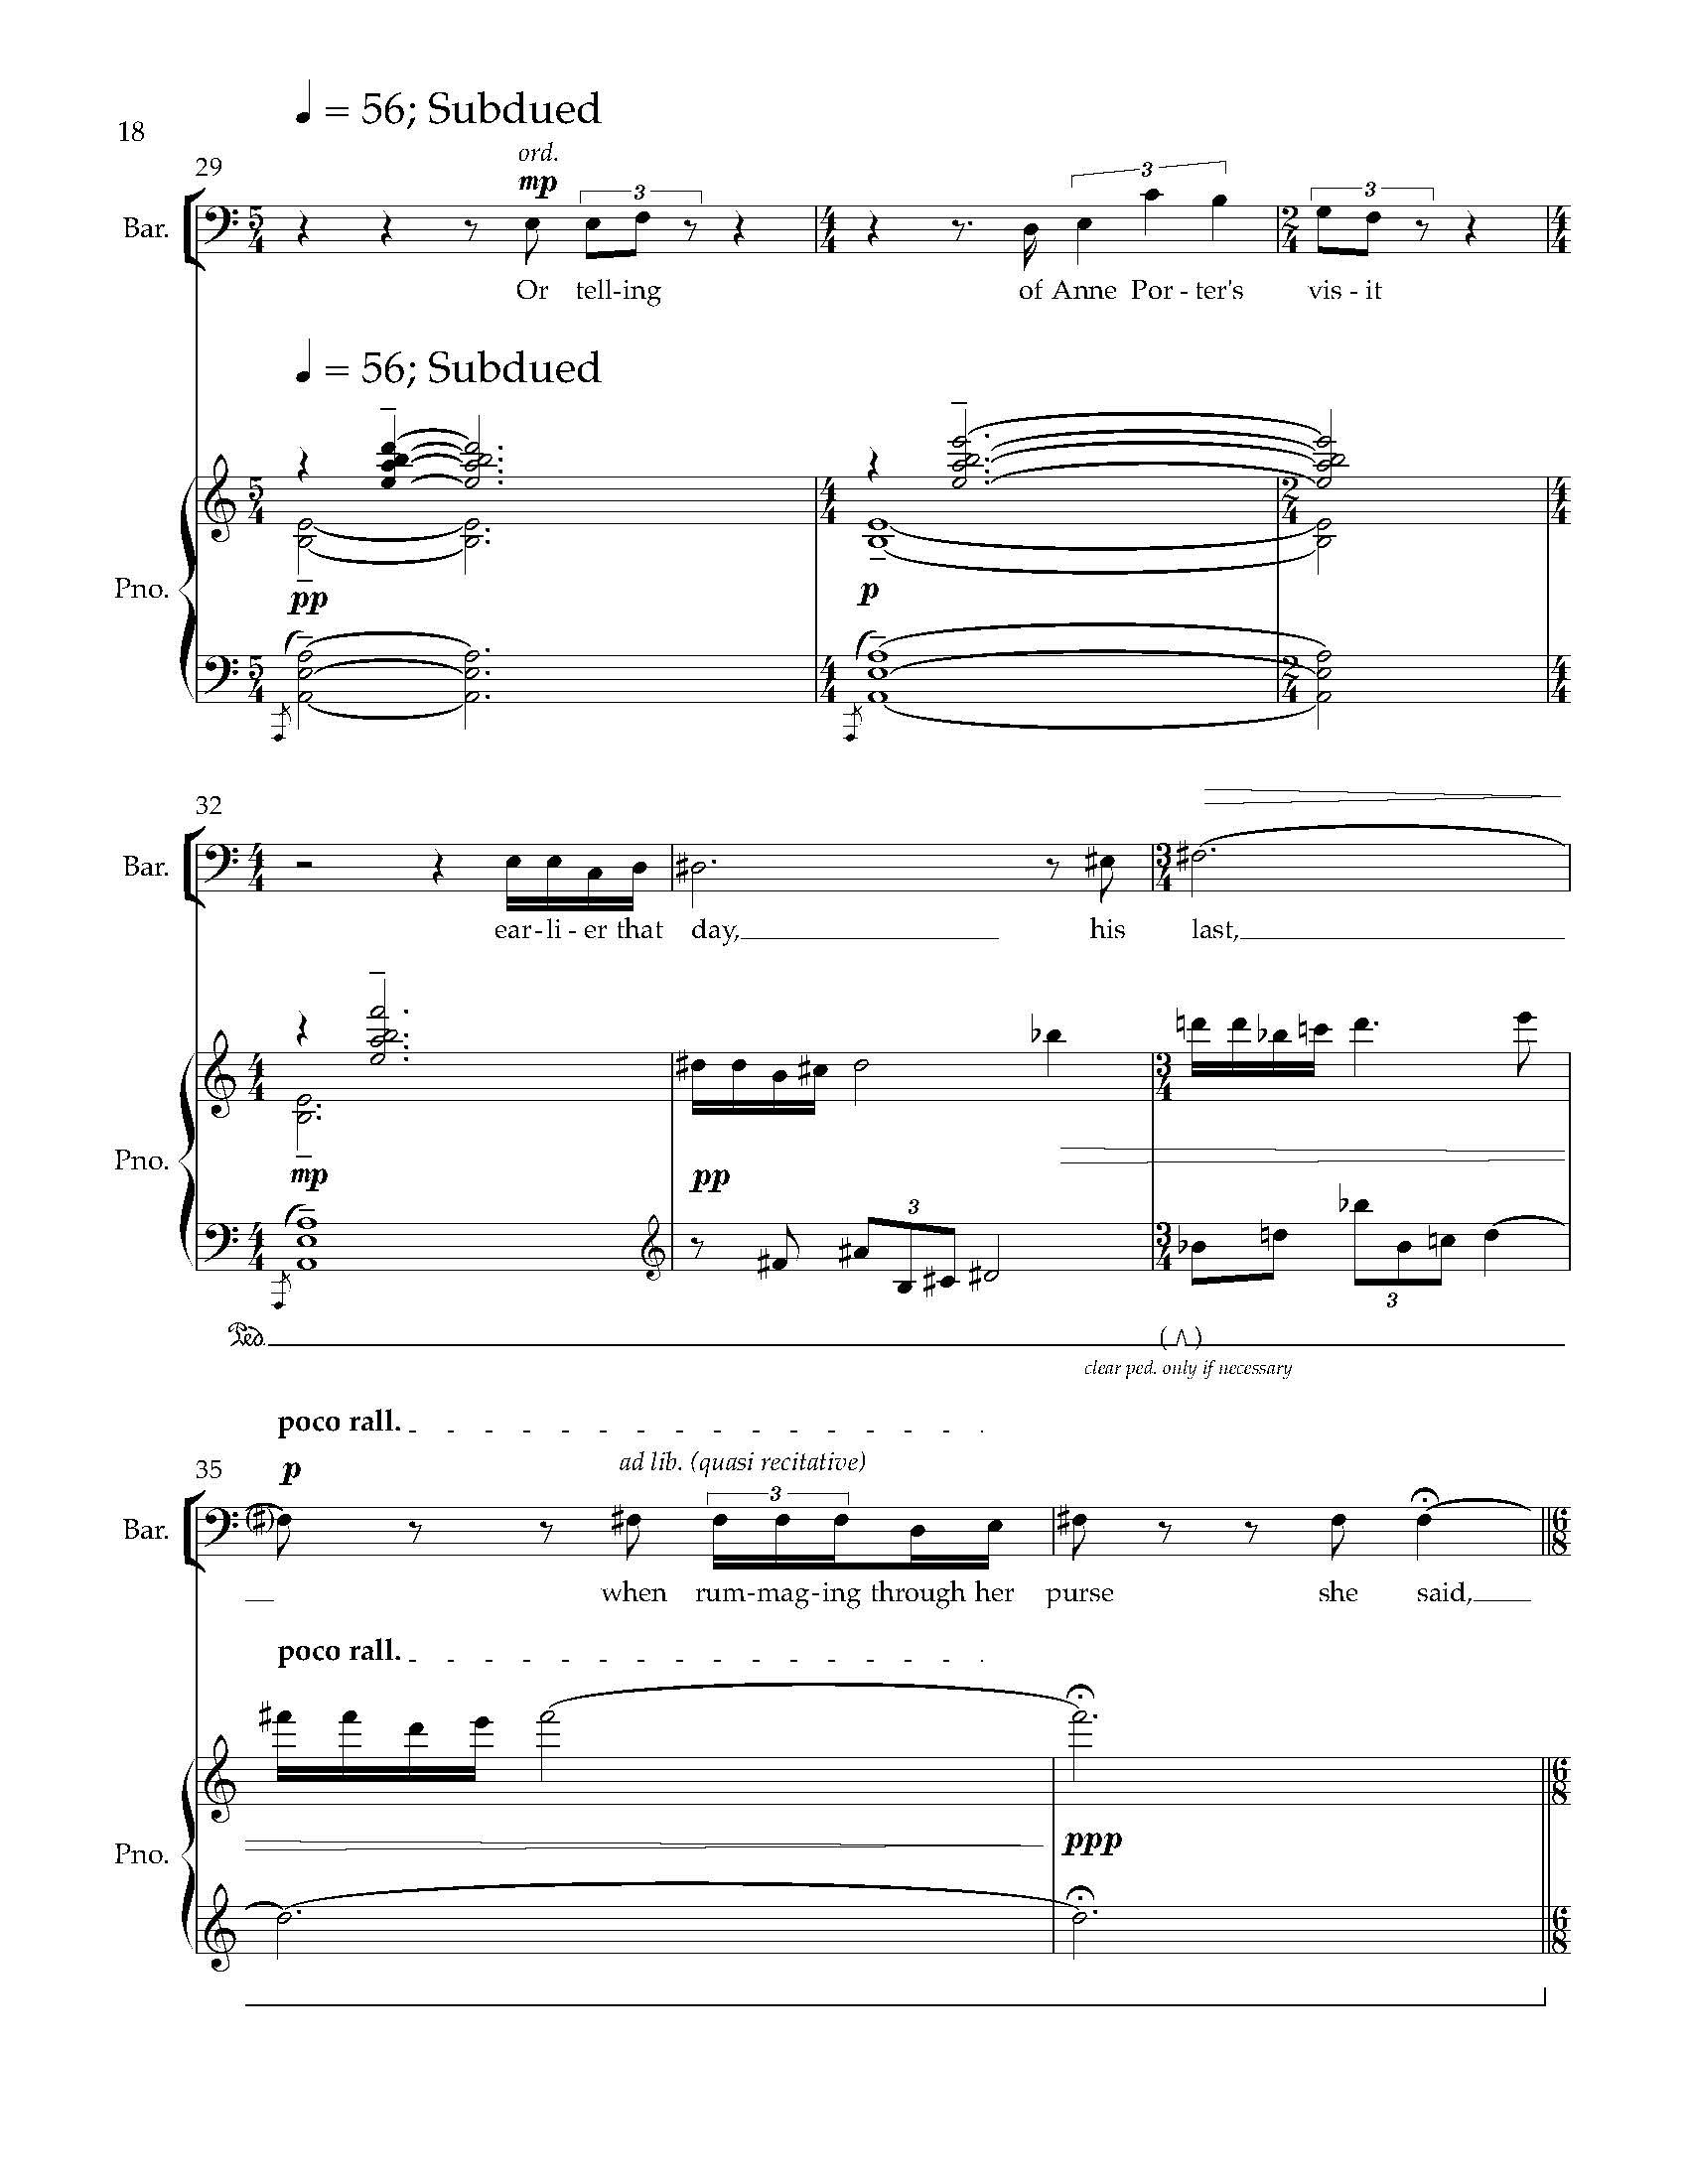 Sky - Complete Score (Revised)_Page_24.jpg